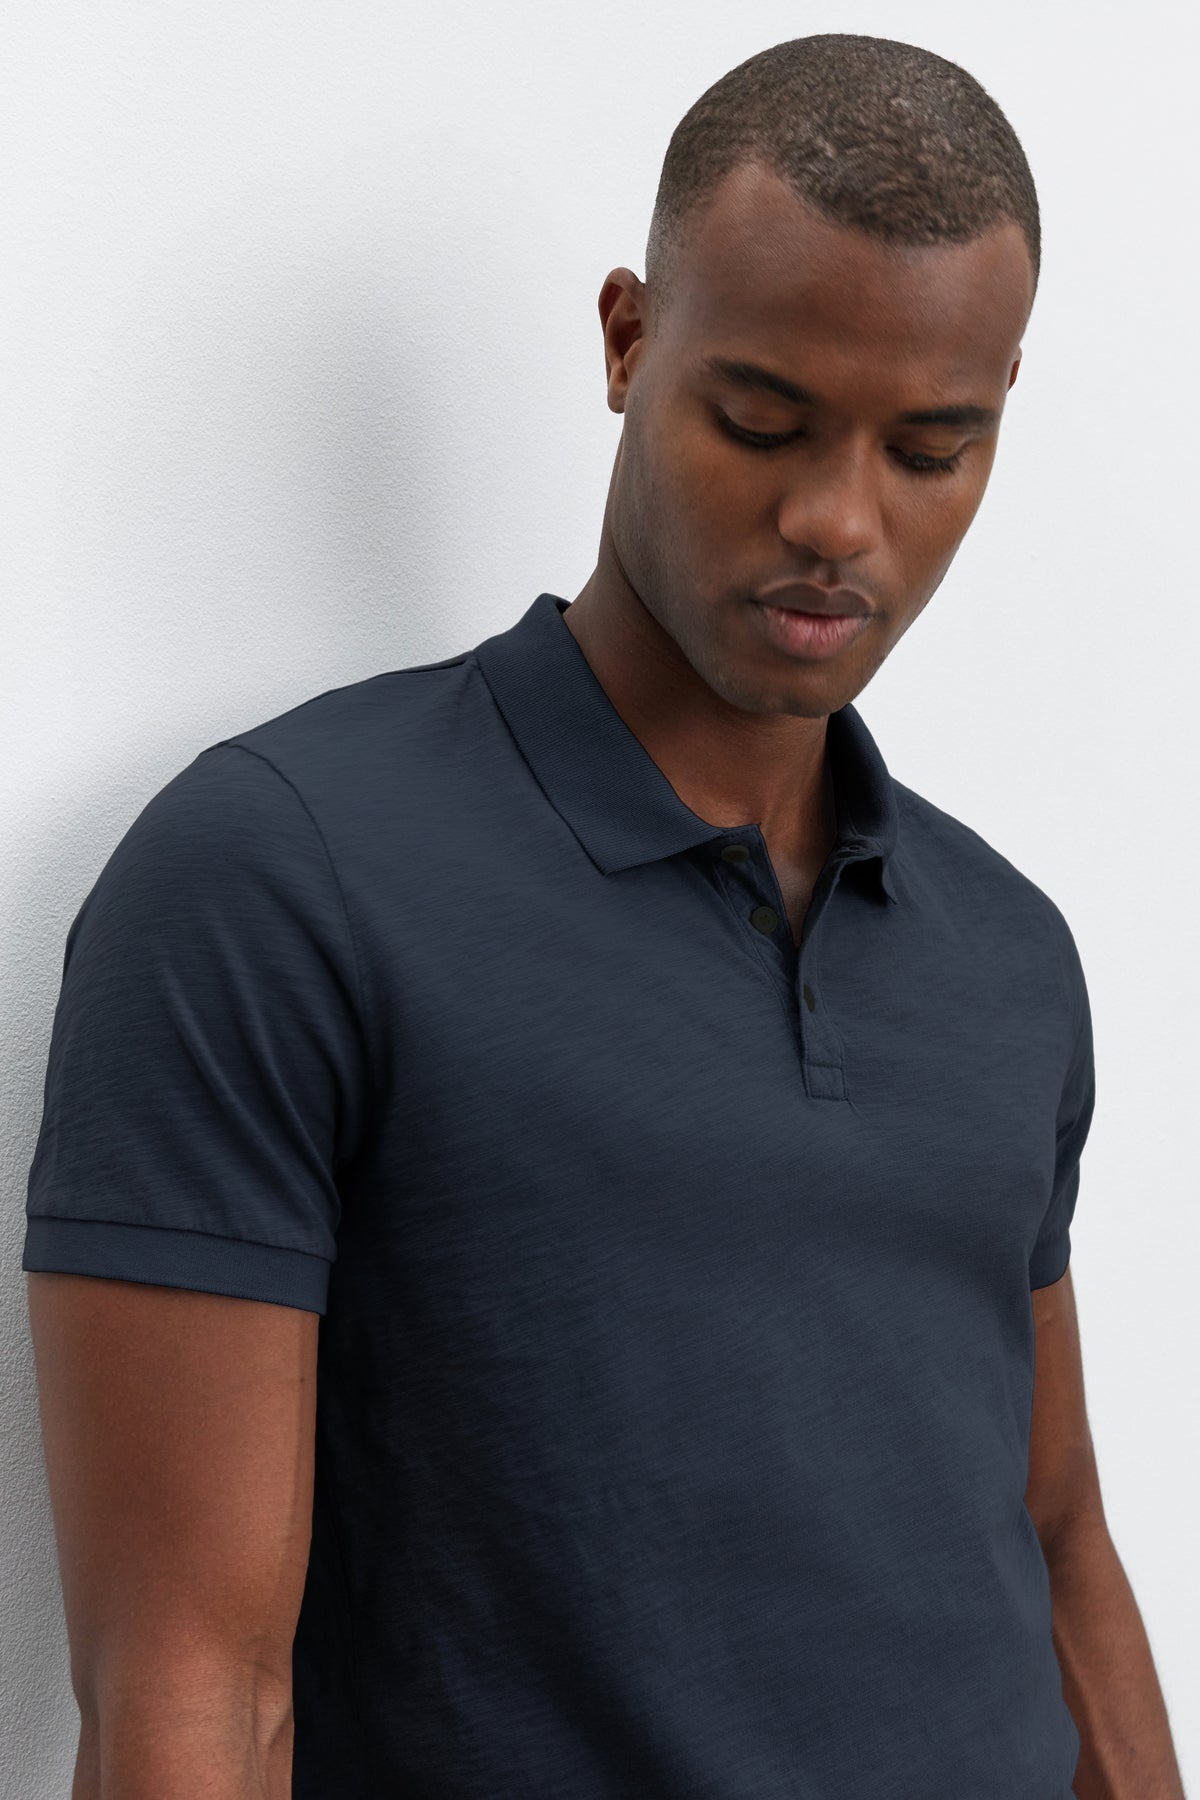 A man wearing a Velvet by Graham & Spencer NIKO POLO shirt with a heathered texture, standing with his eyes closed against a white background.-36890752712897